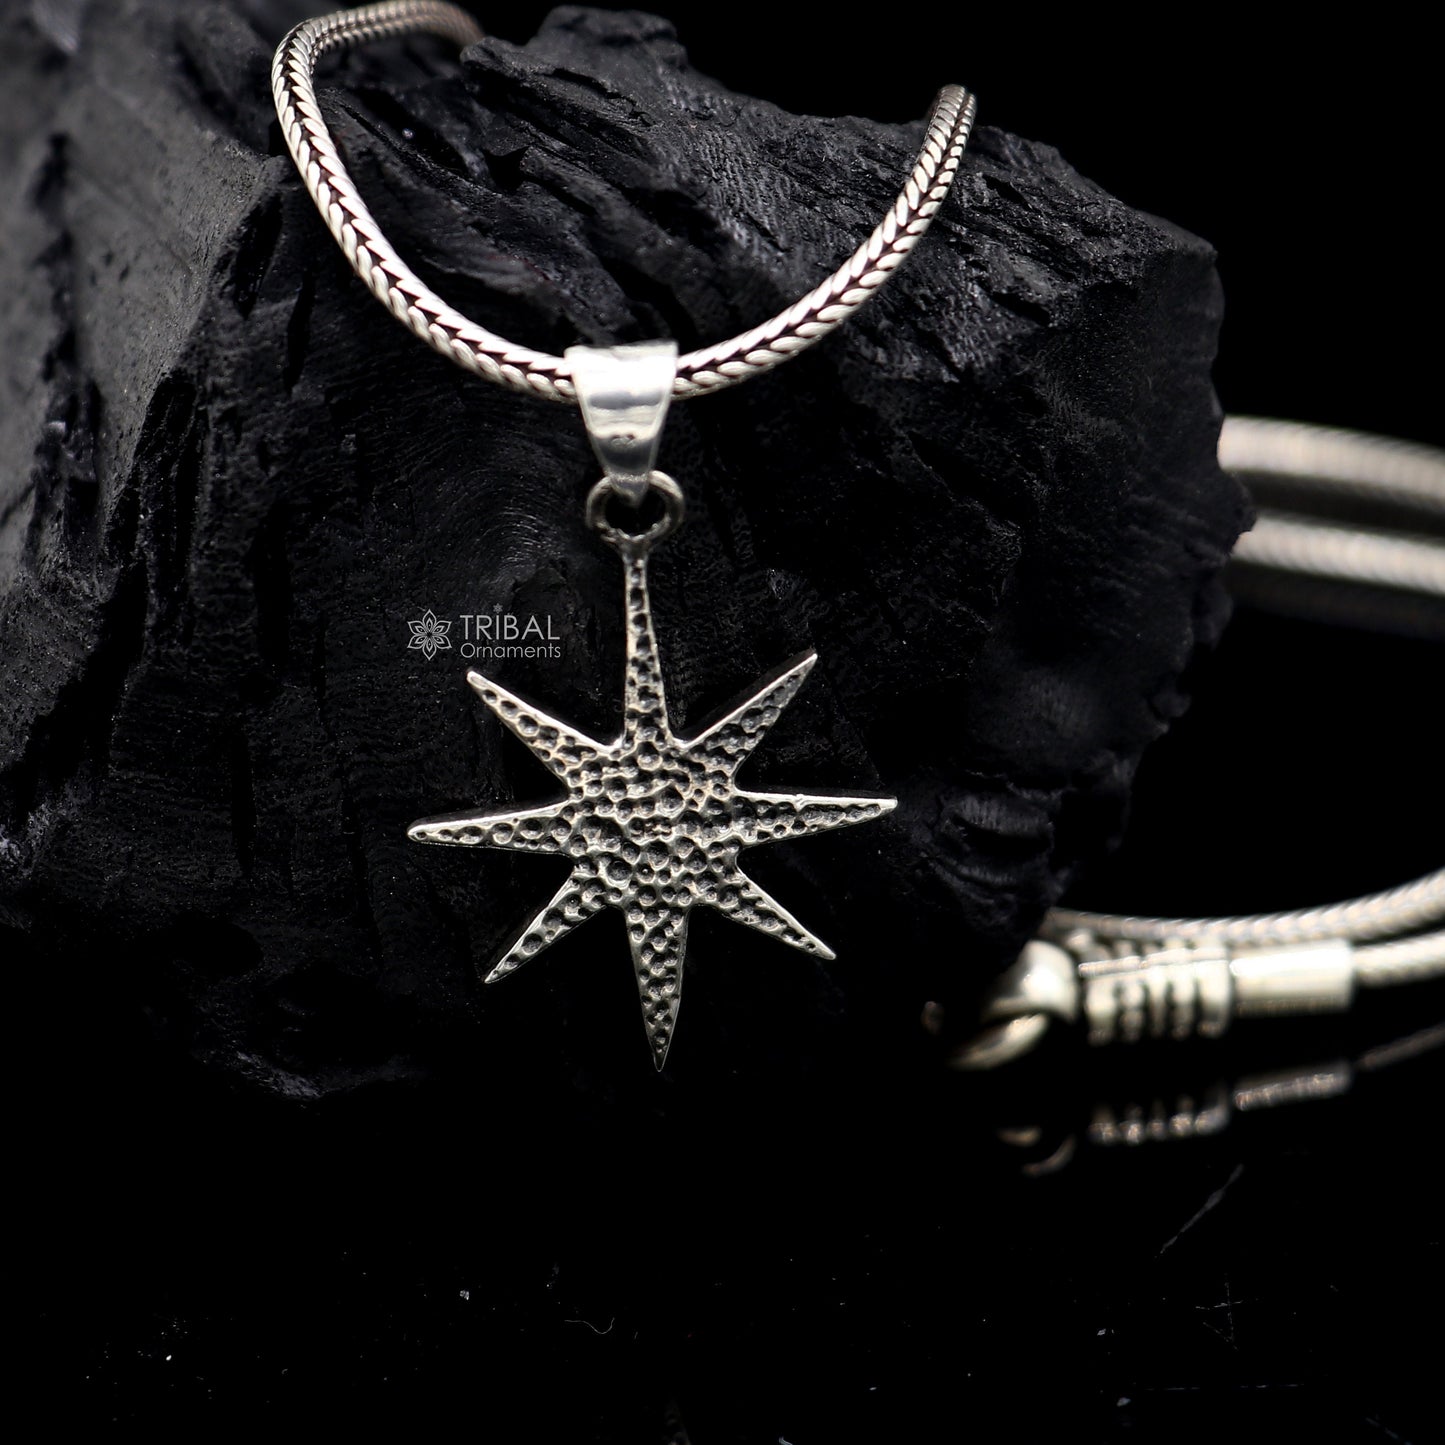 Stylish 925 sterling silver handmade Star design pendant, high quality silver small pendant for boy girls nsp672 - TRIBAL ORNAMENTS